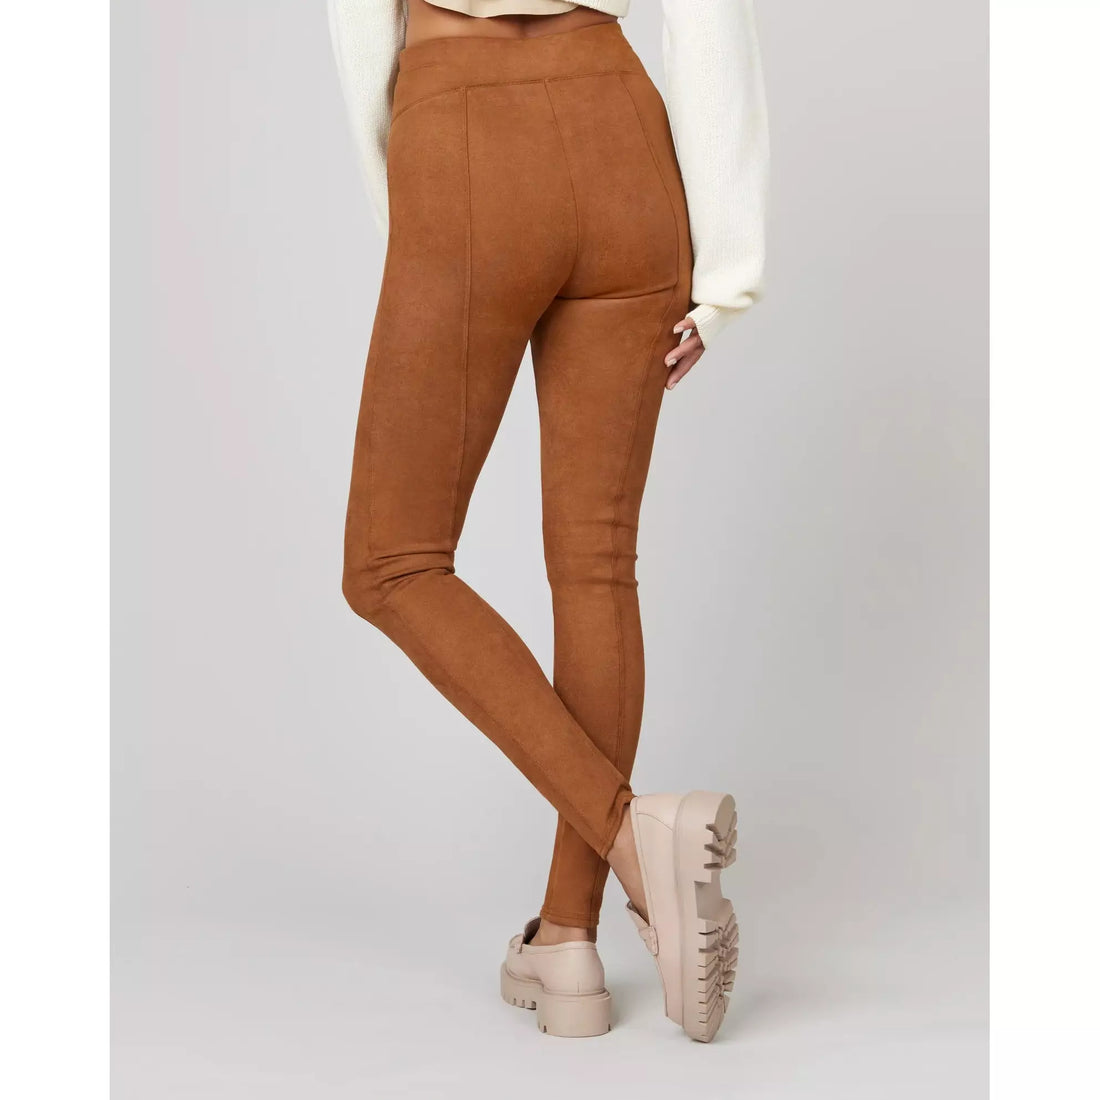 Faux Suede Leggings by Spanx